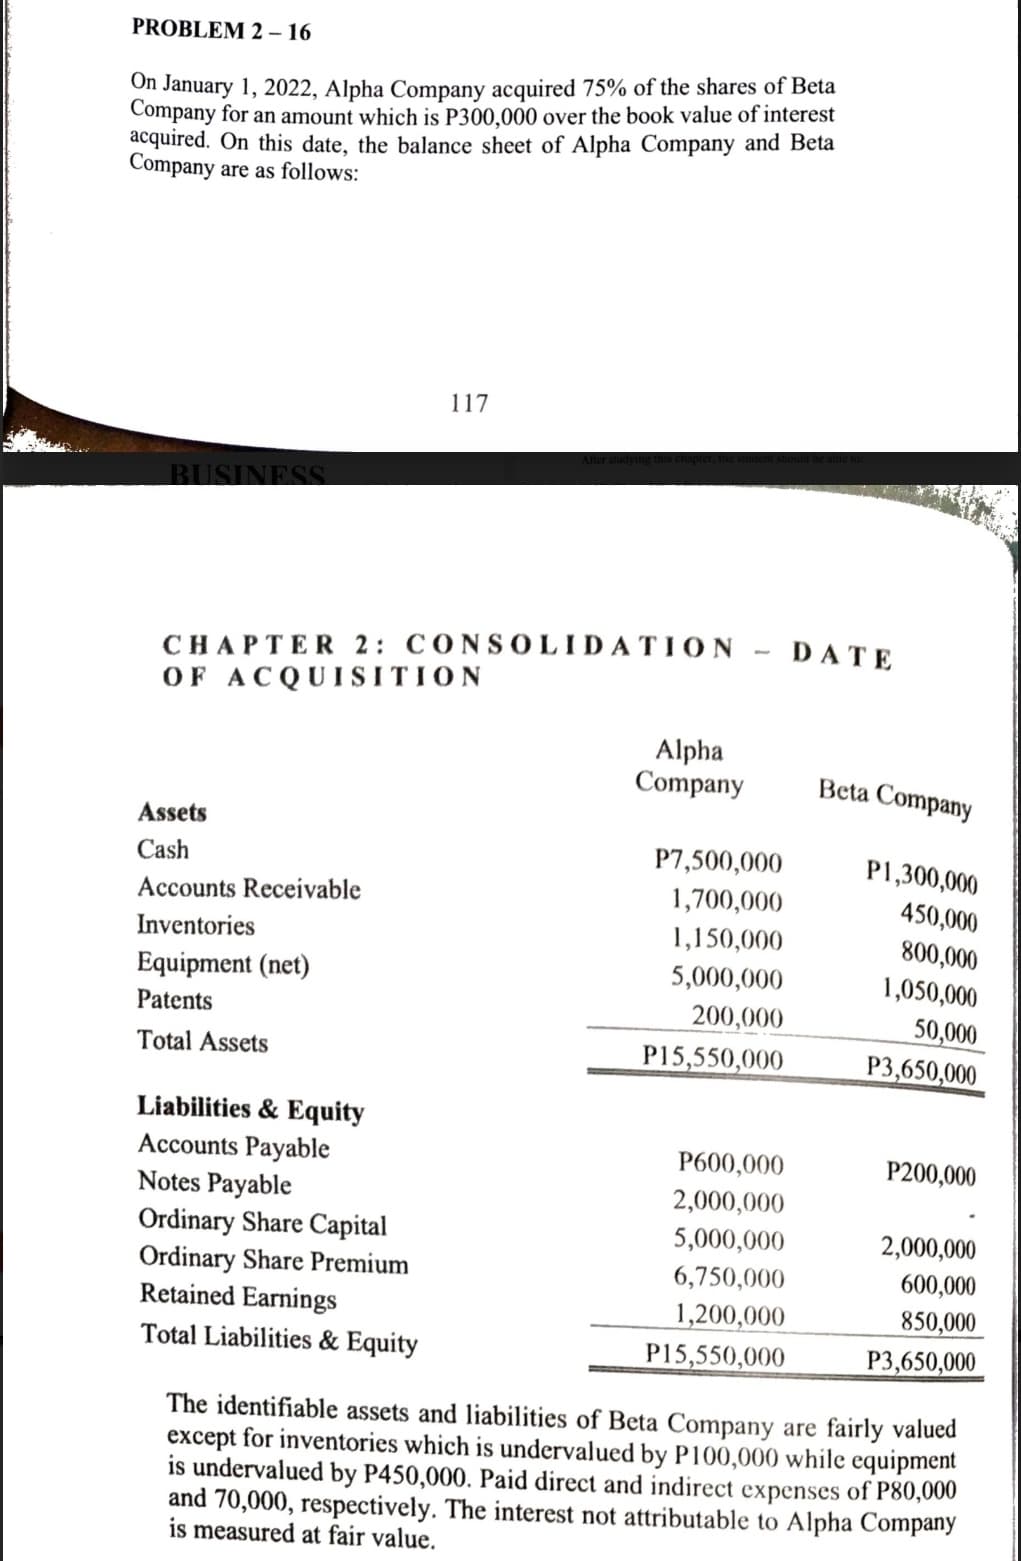 PROBLEM 2-16
On January 1, 2022, Alpha Company acquired 75% of the shares of Beta
Company for an amount which is P300,000 over the book value of interest
acquired. On this date, the balance sheet of Alpha Company and Beta
Company are as follows:
BUSINESS
CHAPTER 2: CONSOLIDATION
OF ACQUISITION
Assets
Cash
Accounts Receivable
Inventories
Equipment (net)
Patents
Total Assets
Liabilities & Equity
Accounts Payable
Notes Payable
117
Ordinary Share Capital
Ordinary Share Premium
Retained Earnings
Total Liabilities & Equity
Alpha
Company
P7,500,000
1,700,000
1,150,000
5,000,000
200,000
P15,550,000
P600,000
2,000,000
5,000,000
6,750,000
1,200,000
P15,550,000
DATE
Beta Company
P1,300,000
450,000
800,000
1,050,000
50,000
P3,650,000
P200,000
2,000,000
600,000
850,000
P3,650,000
The identifiable assets and liabilities of Beta Company are fairly valued
except for inventories which is undervalued by P100,000 while equipment
is undervalued by P450,000. Paid direct and indirect expenses of P80,000
and 70,000, respectively. The interest not attributable to Alpha Company
is measured at fair value.